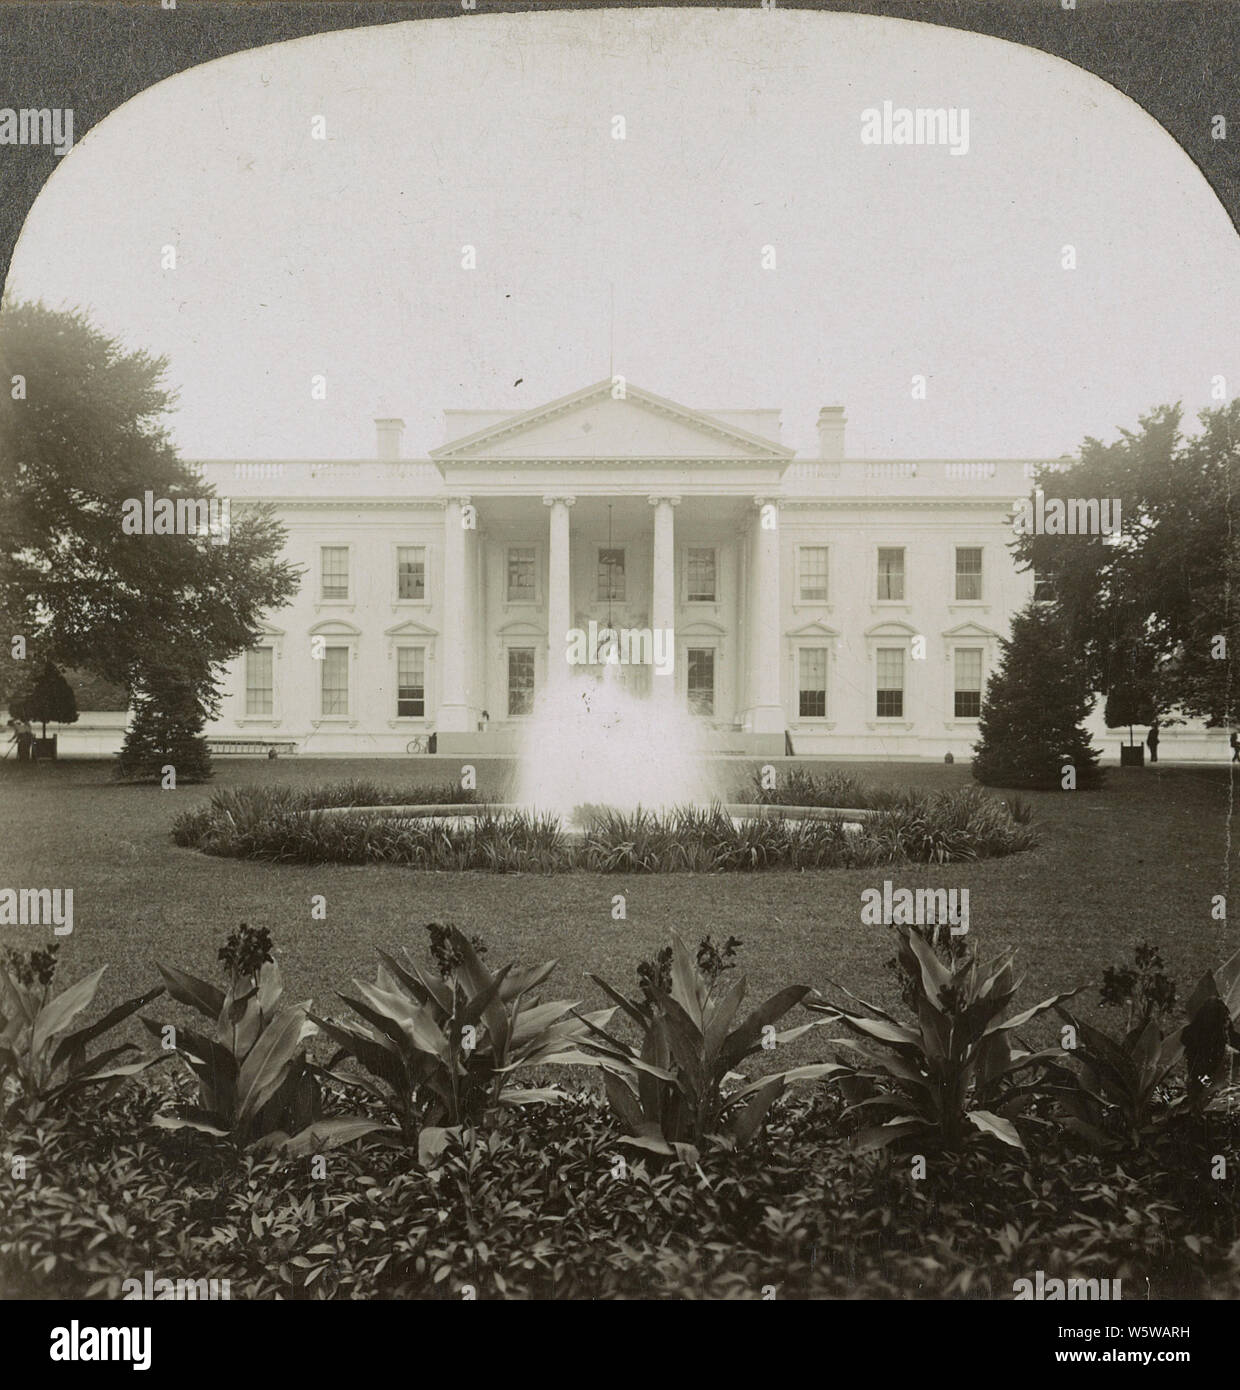 White House (north front), the historic official home of the President, Washington, D.C. in 1927. The White House is the official residence and workplace of the president of the United States. It is located at 1600 Pennsylvania Avenue NW in Washington, D.C. and has been the residence of every U.S. president since John Adams in 1800. Stock Photo